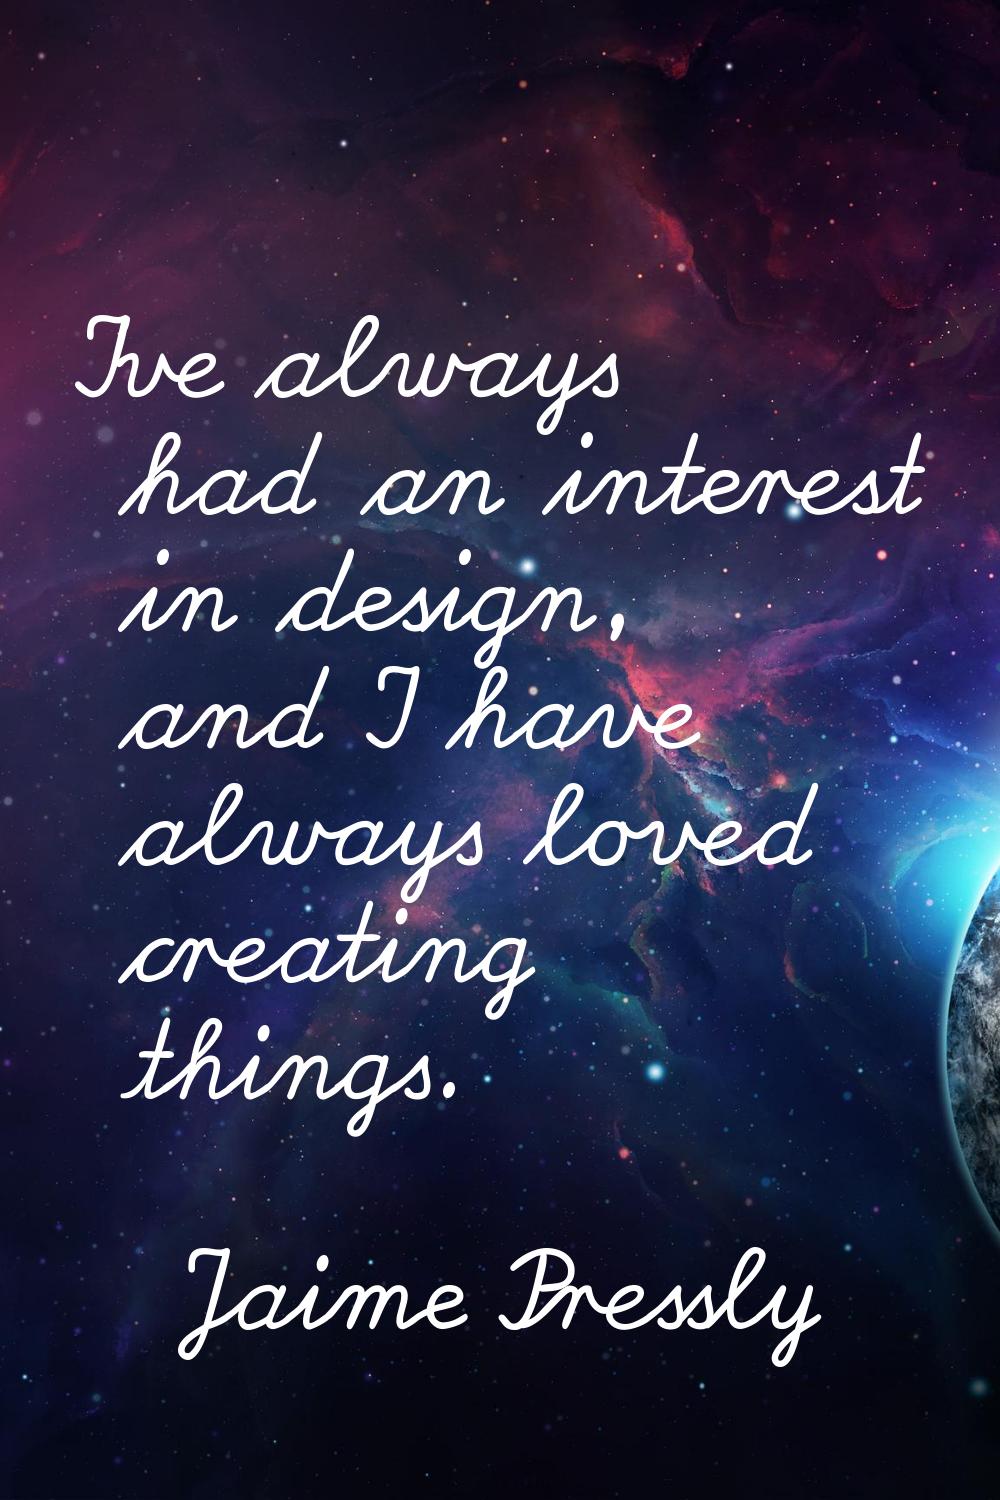 I've always had an interest in design, and I have always loved creating things.